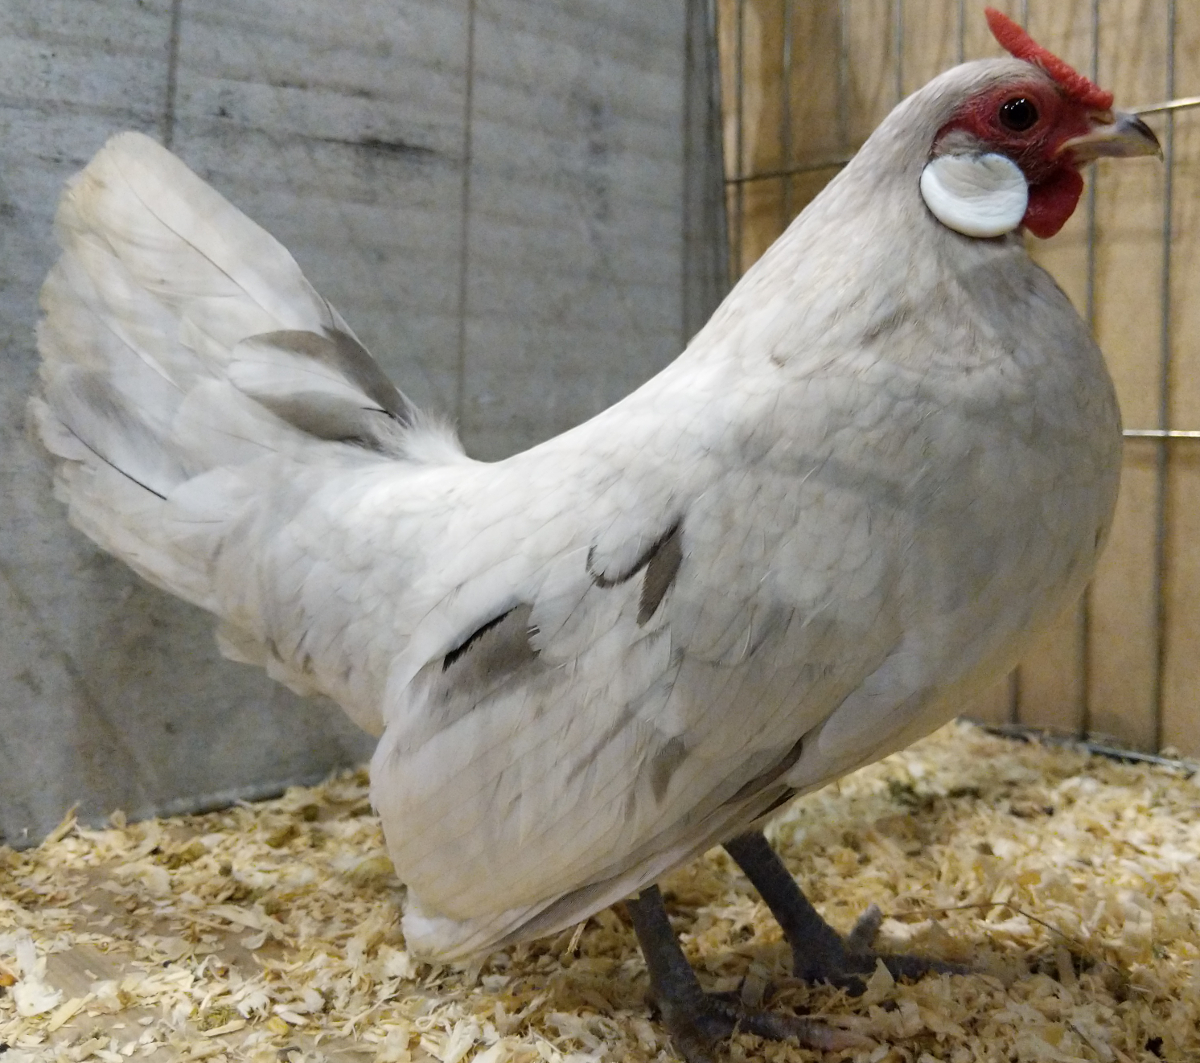 A splash rose-comb bantam chicken in a show cage